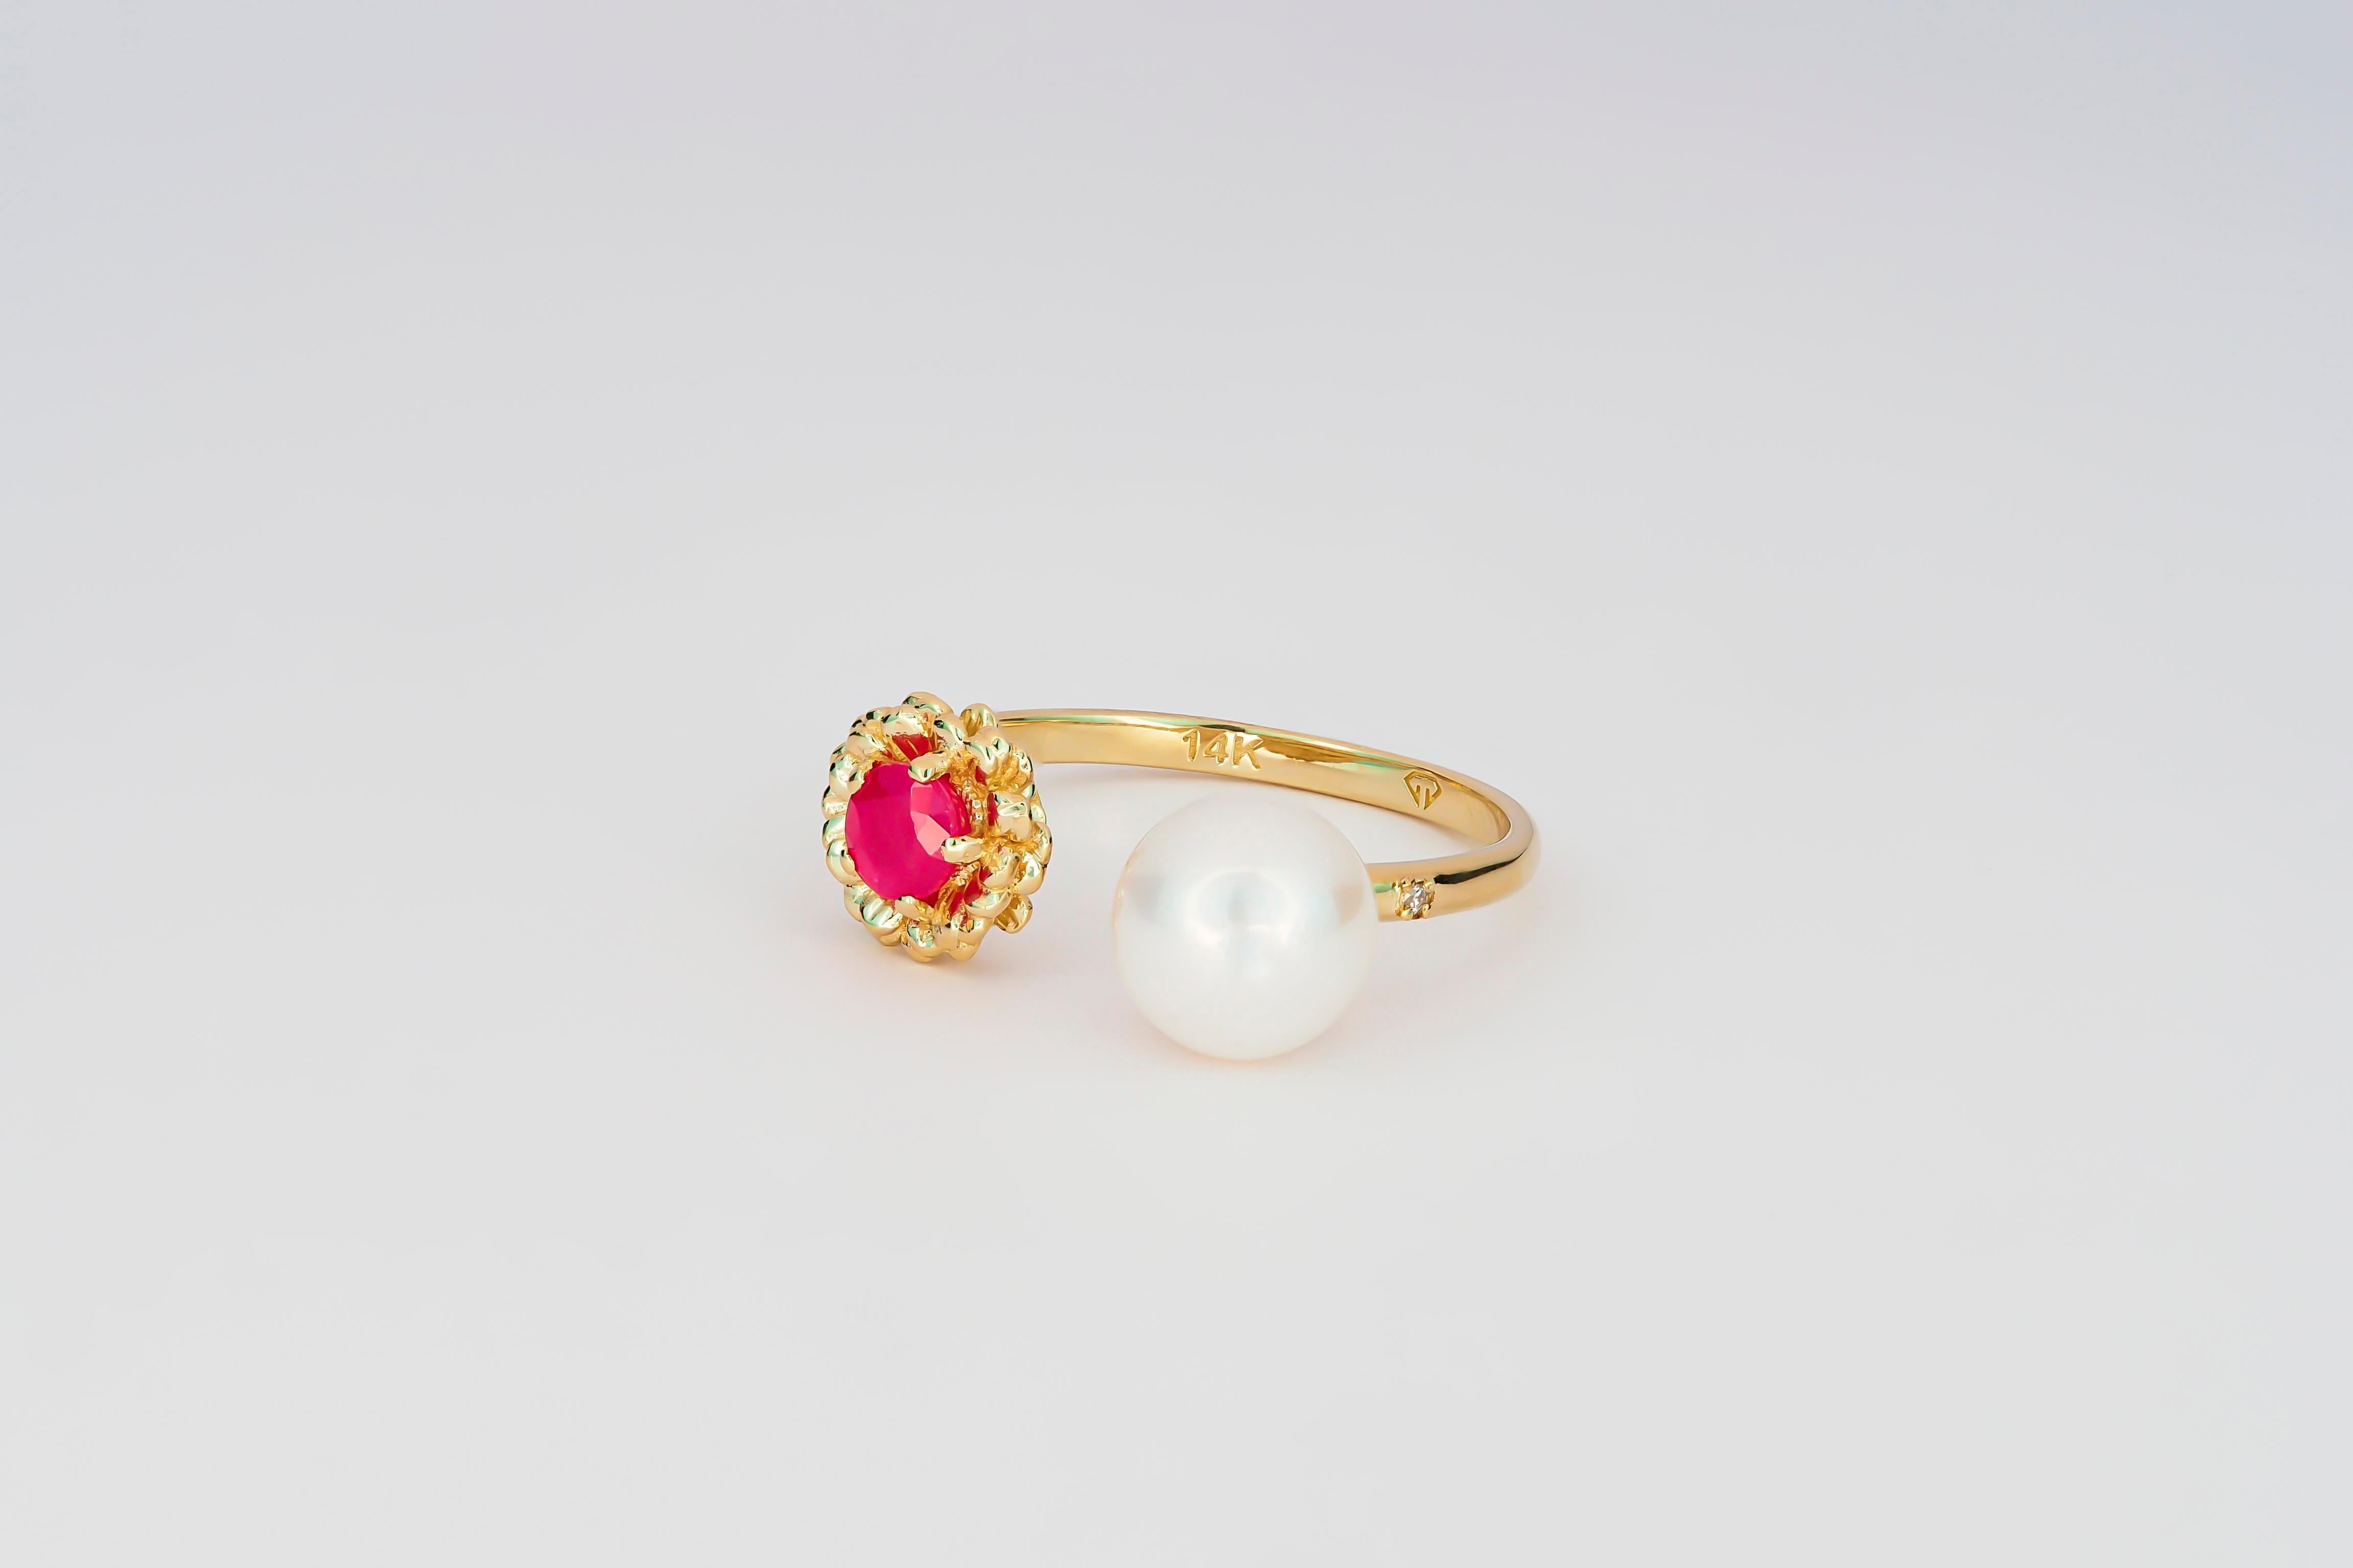 For Sale:  14k Gold Ring with Ruby, Pearl and Diamond, Flower Ring 7